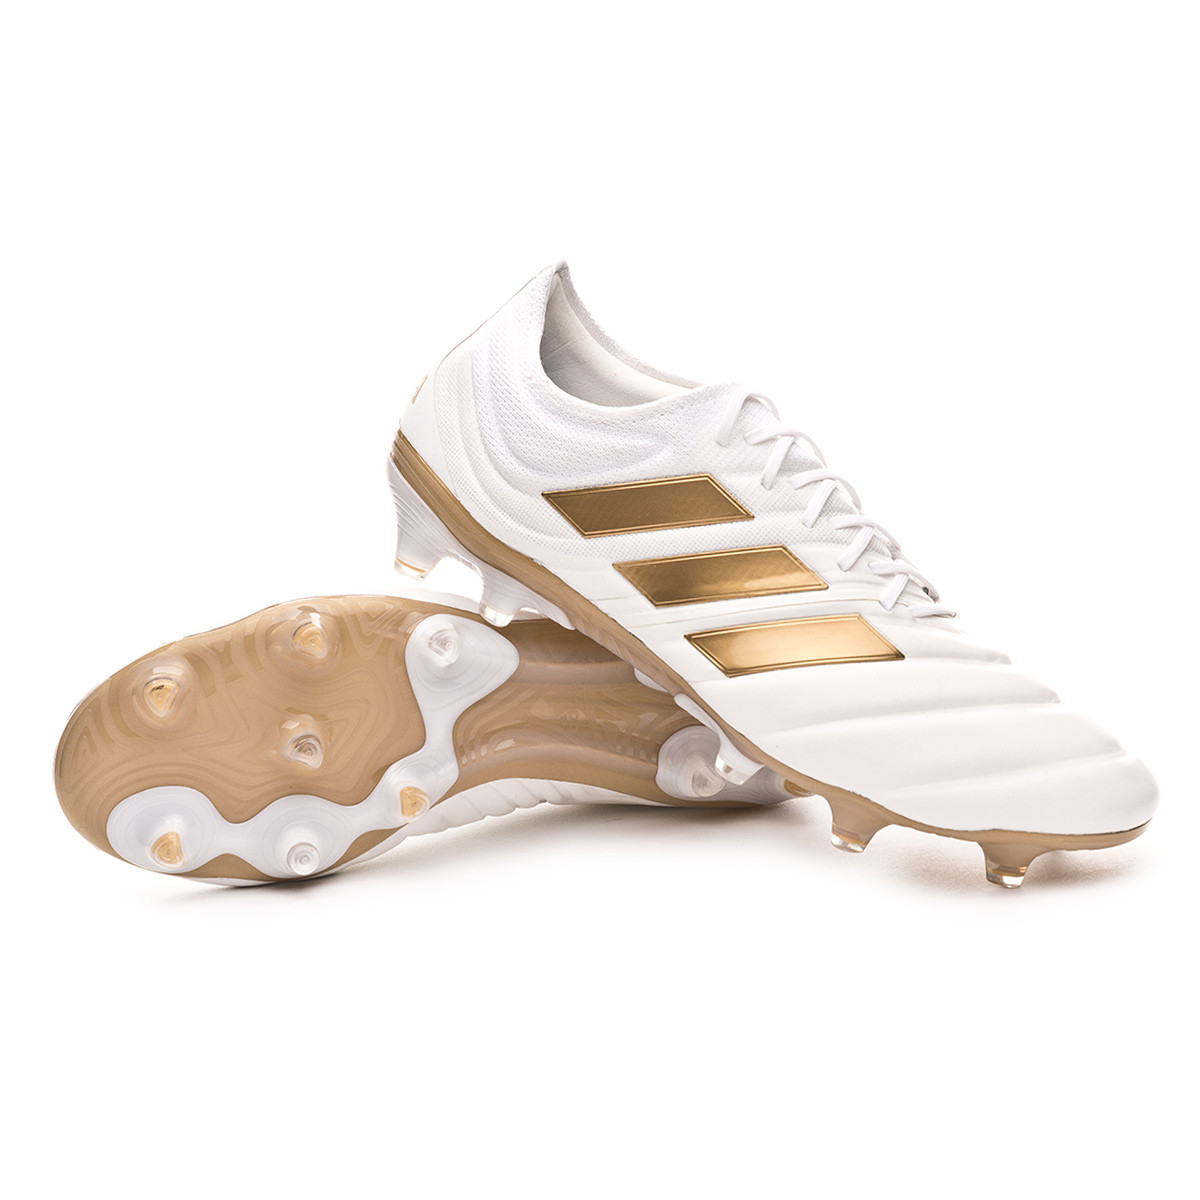 adidas white and gold football boots